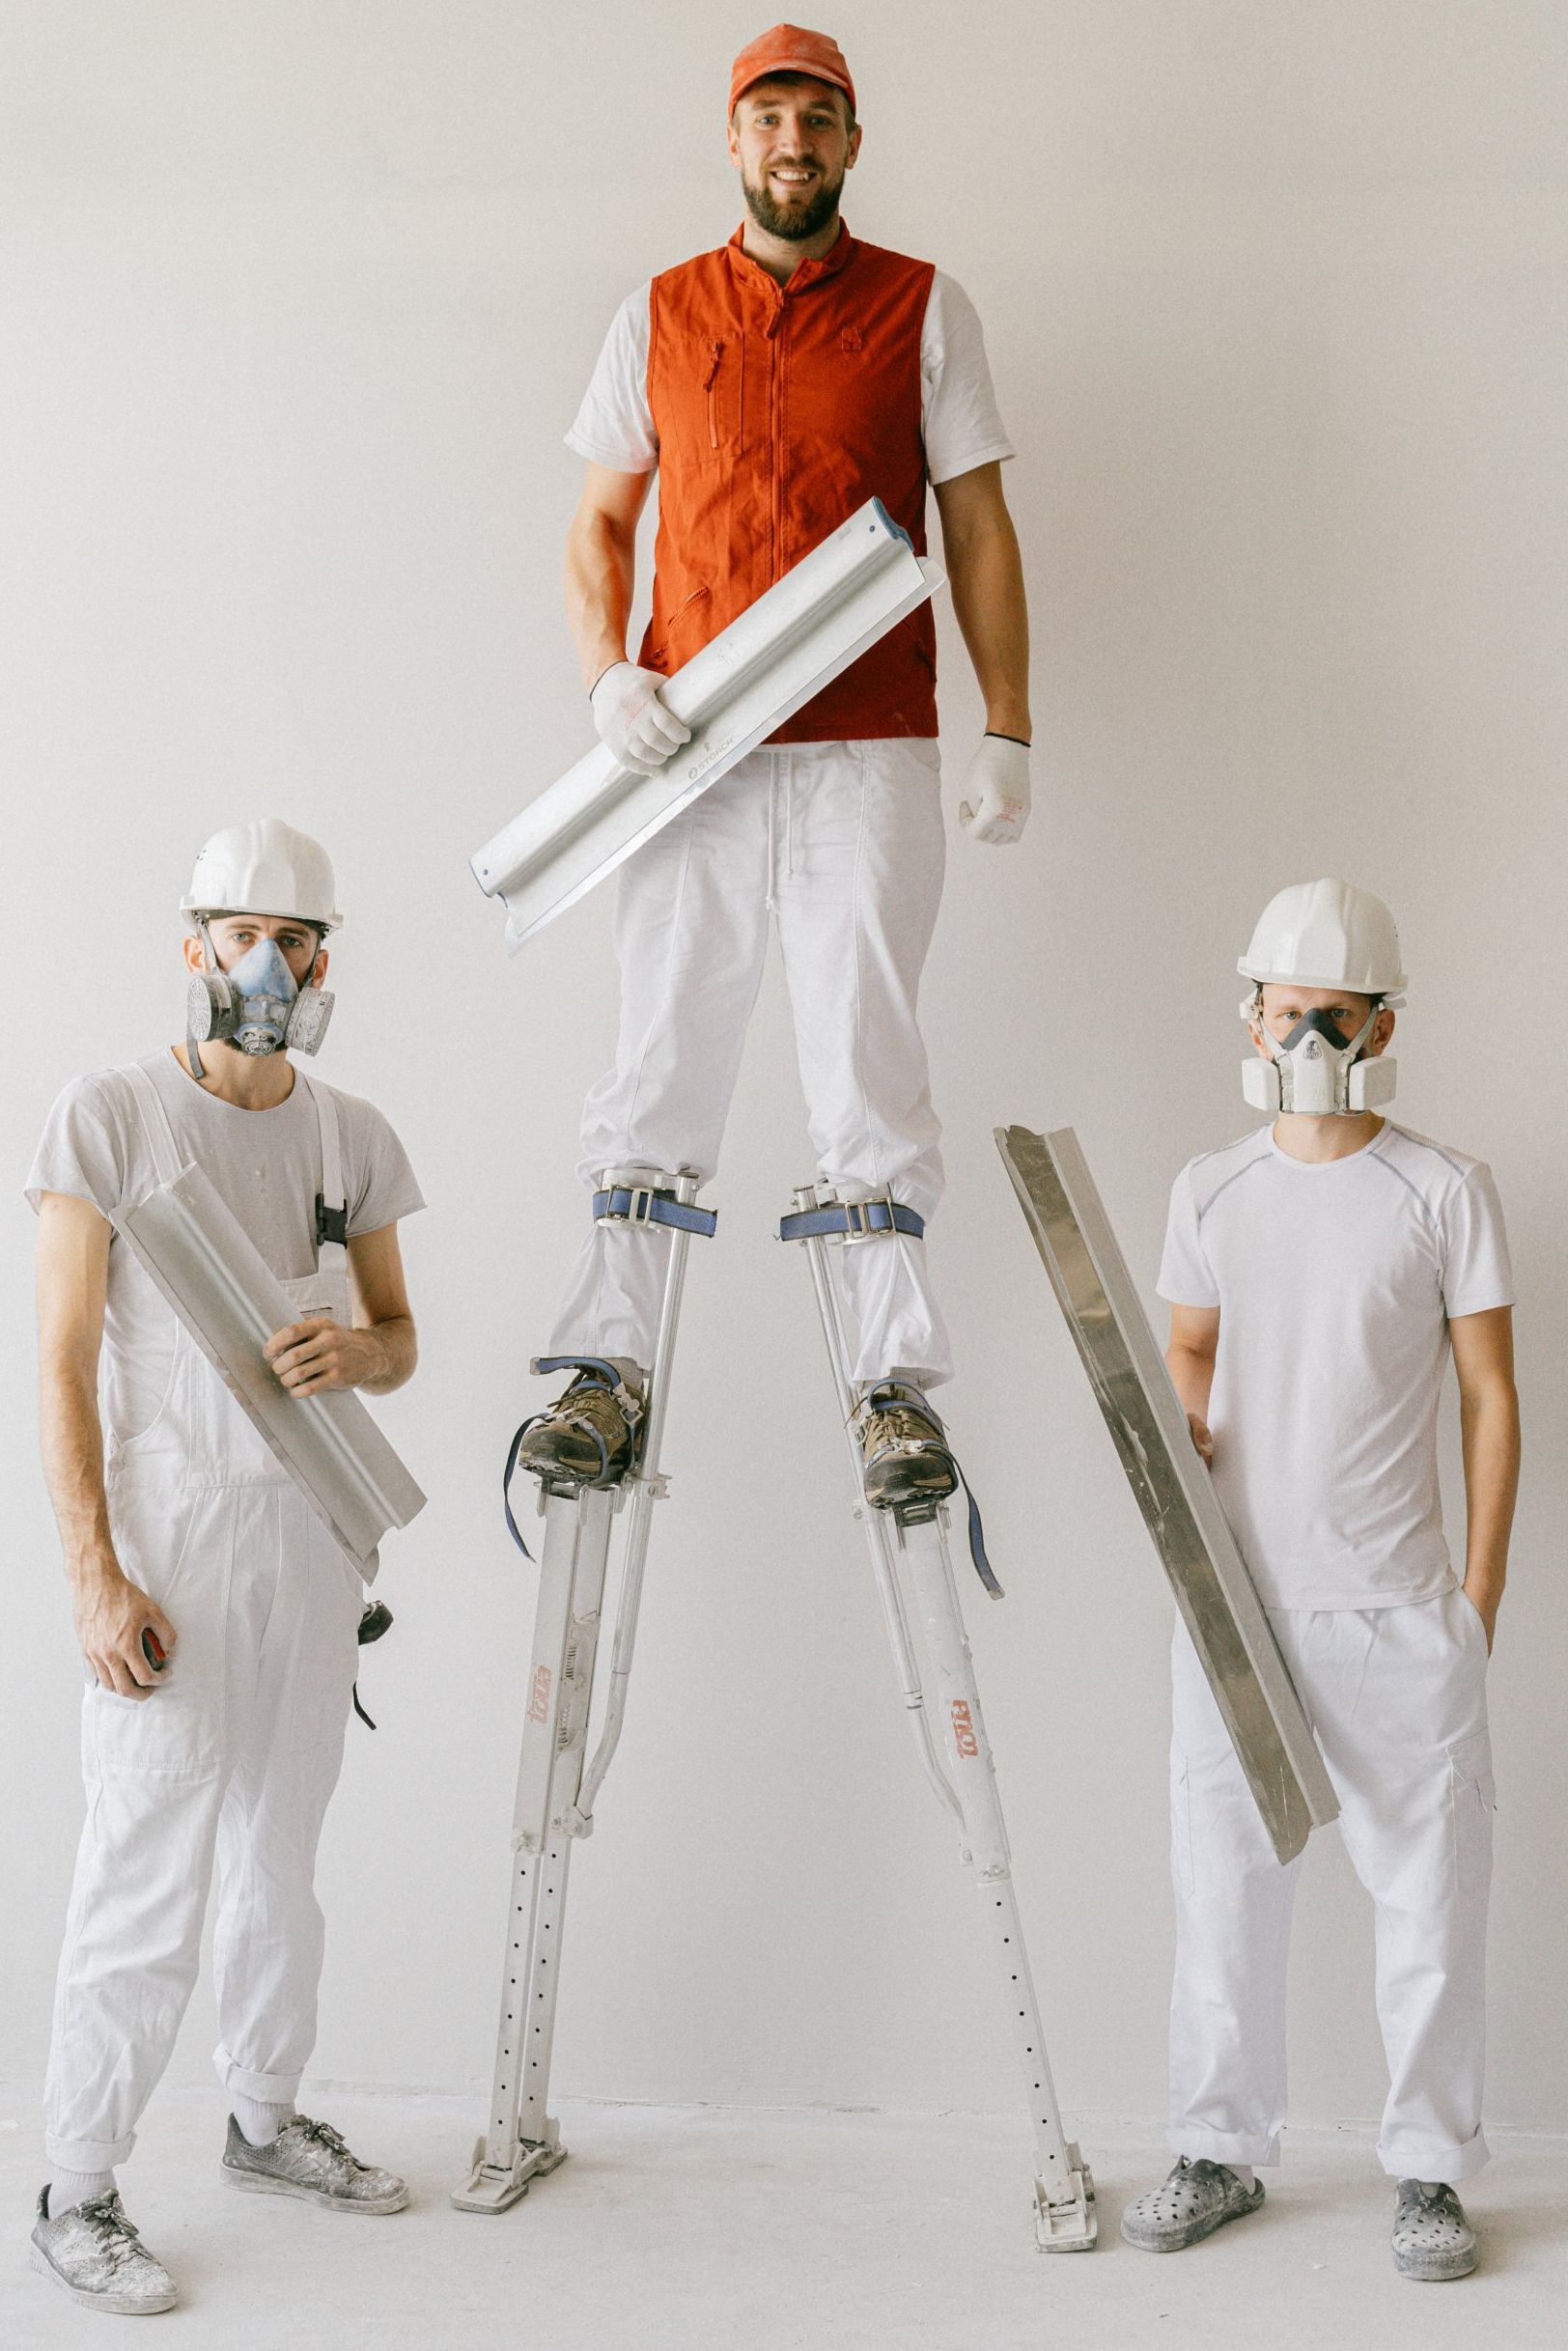 3 men fixing drywall with one man on stilts